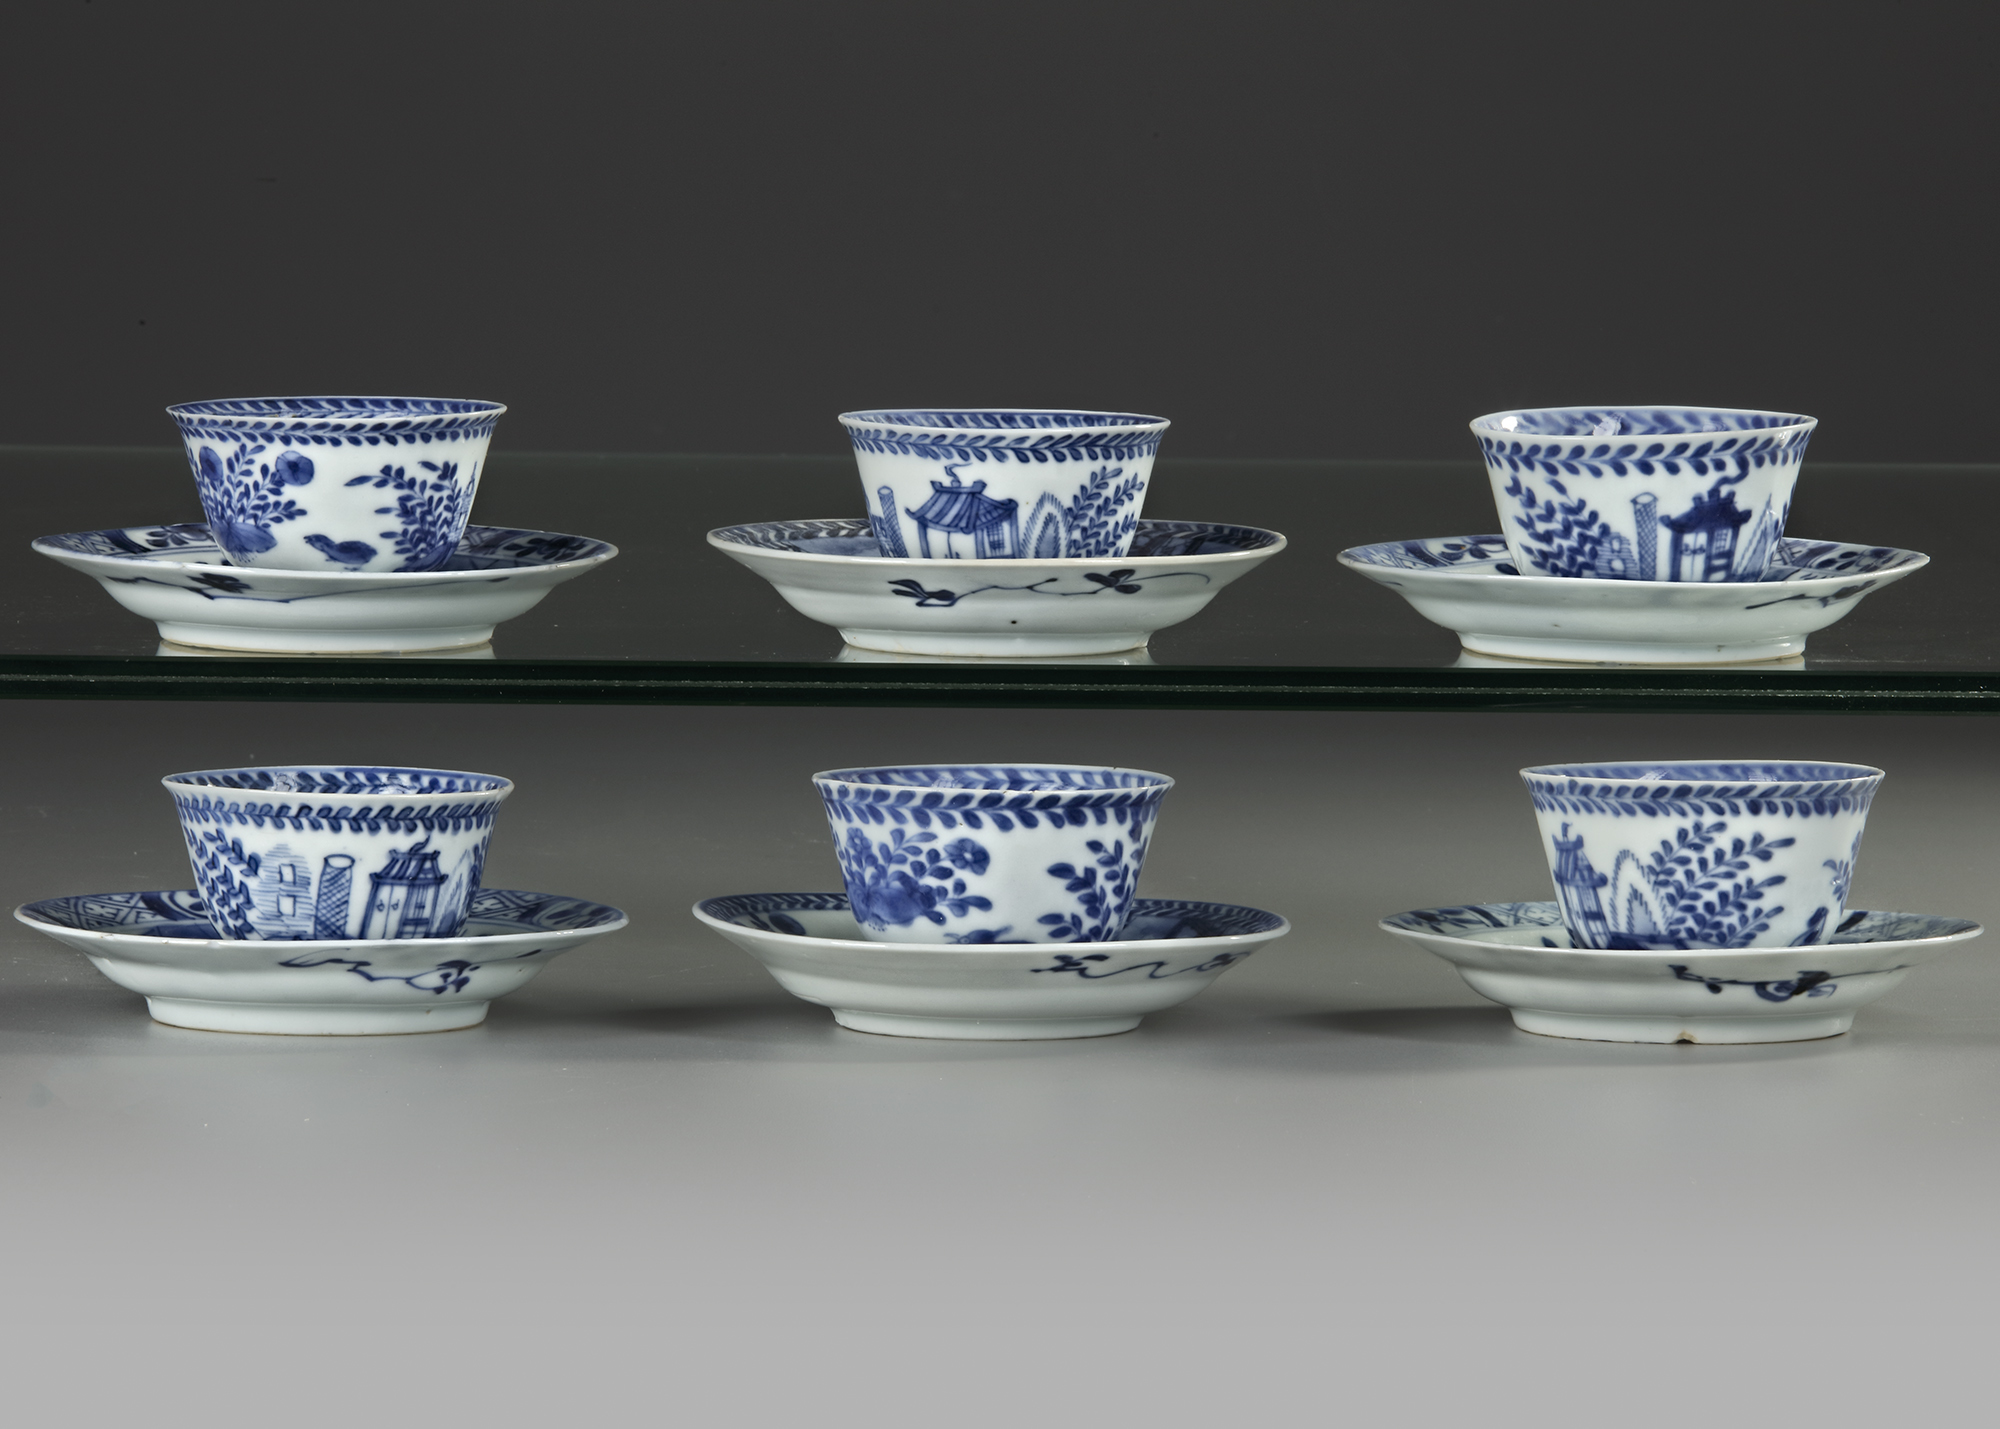 SIX CHINESE BLUE AND WHITE 'CUCKOO IN THE HOUSE' CUPS AND SAUCERS, 18TH CENTURY - Image 2 of 4